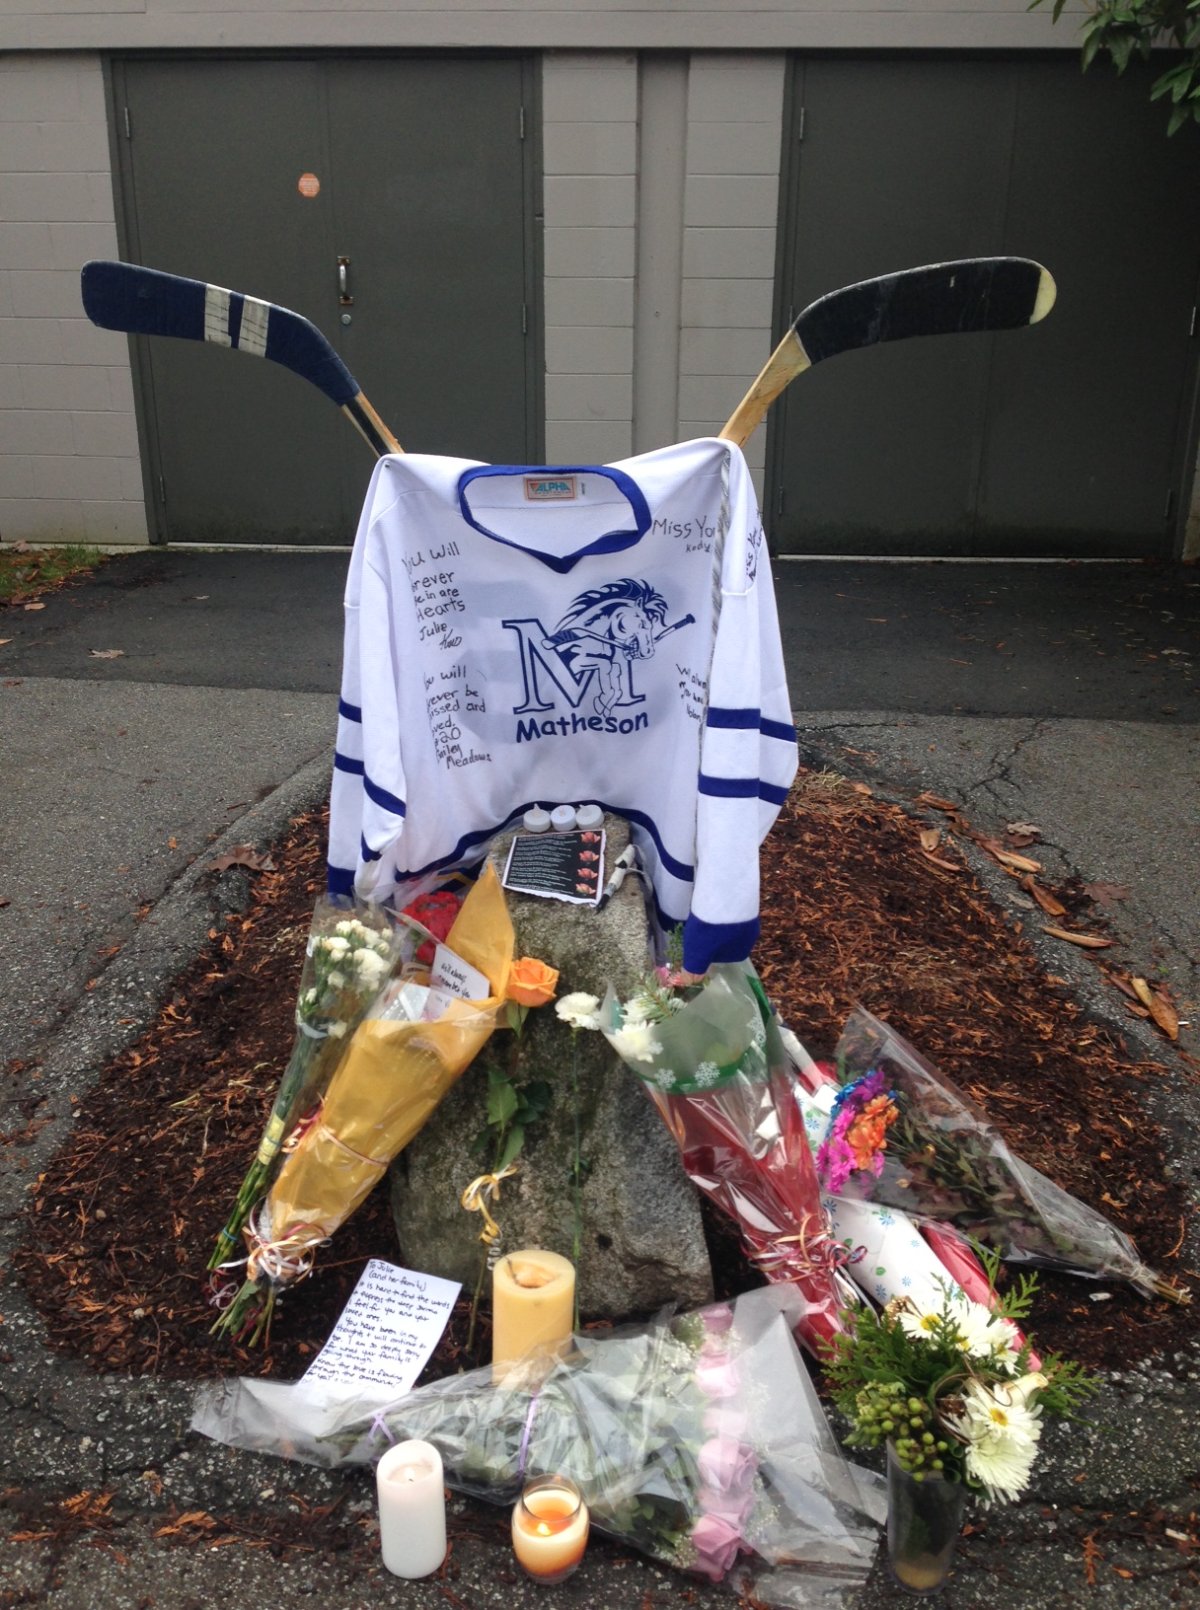 A memorial to Julie Paskall outside the Newton Rec Centre.